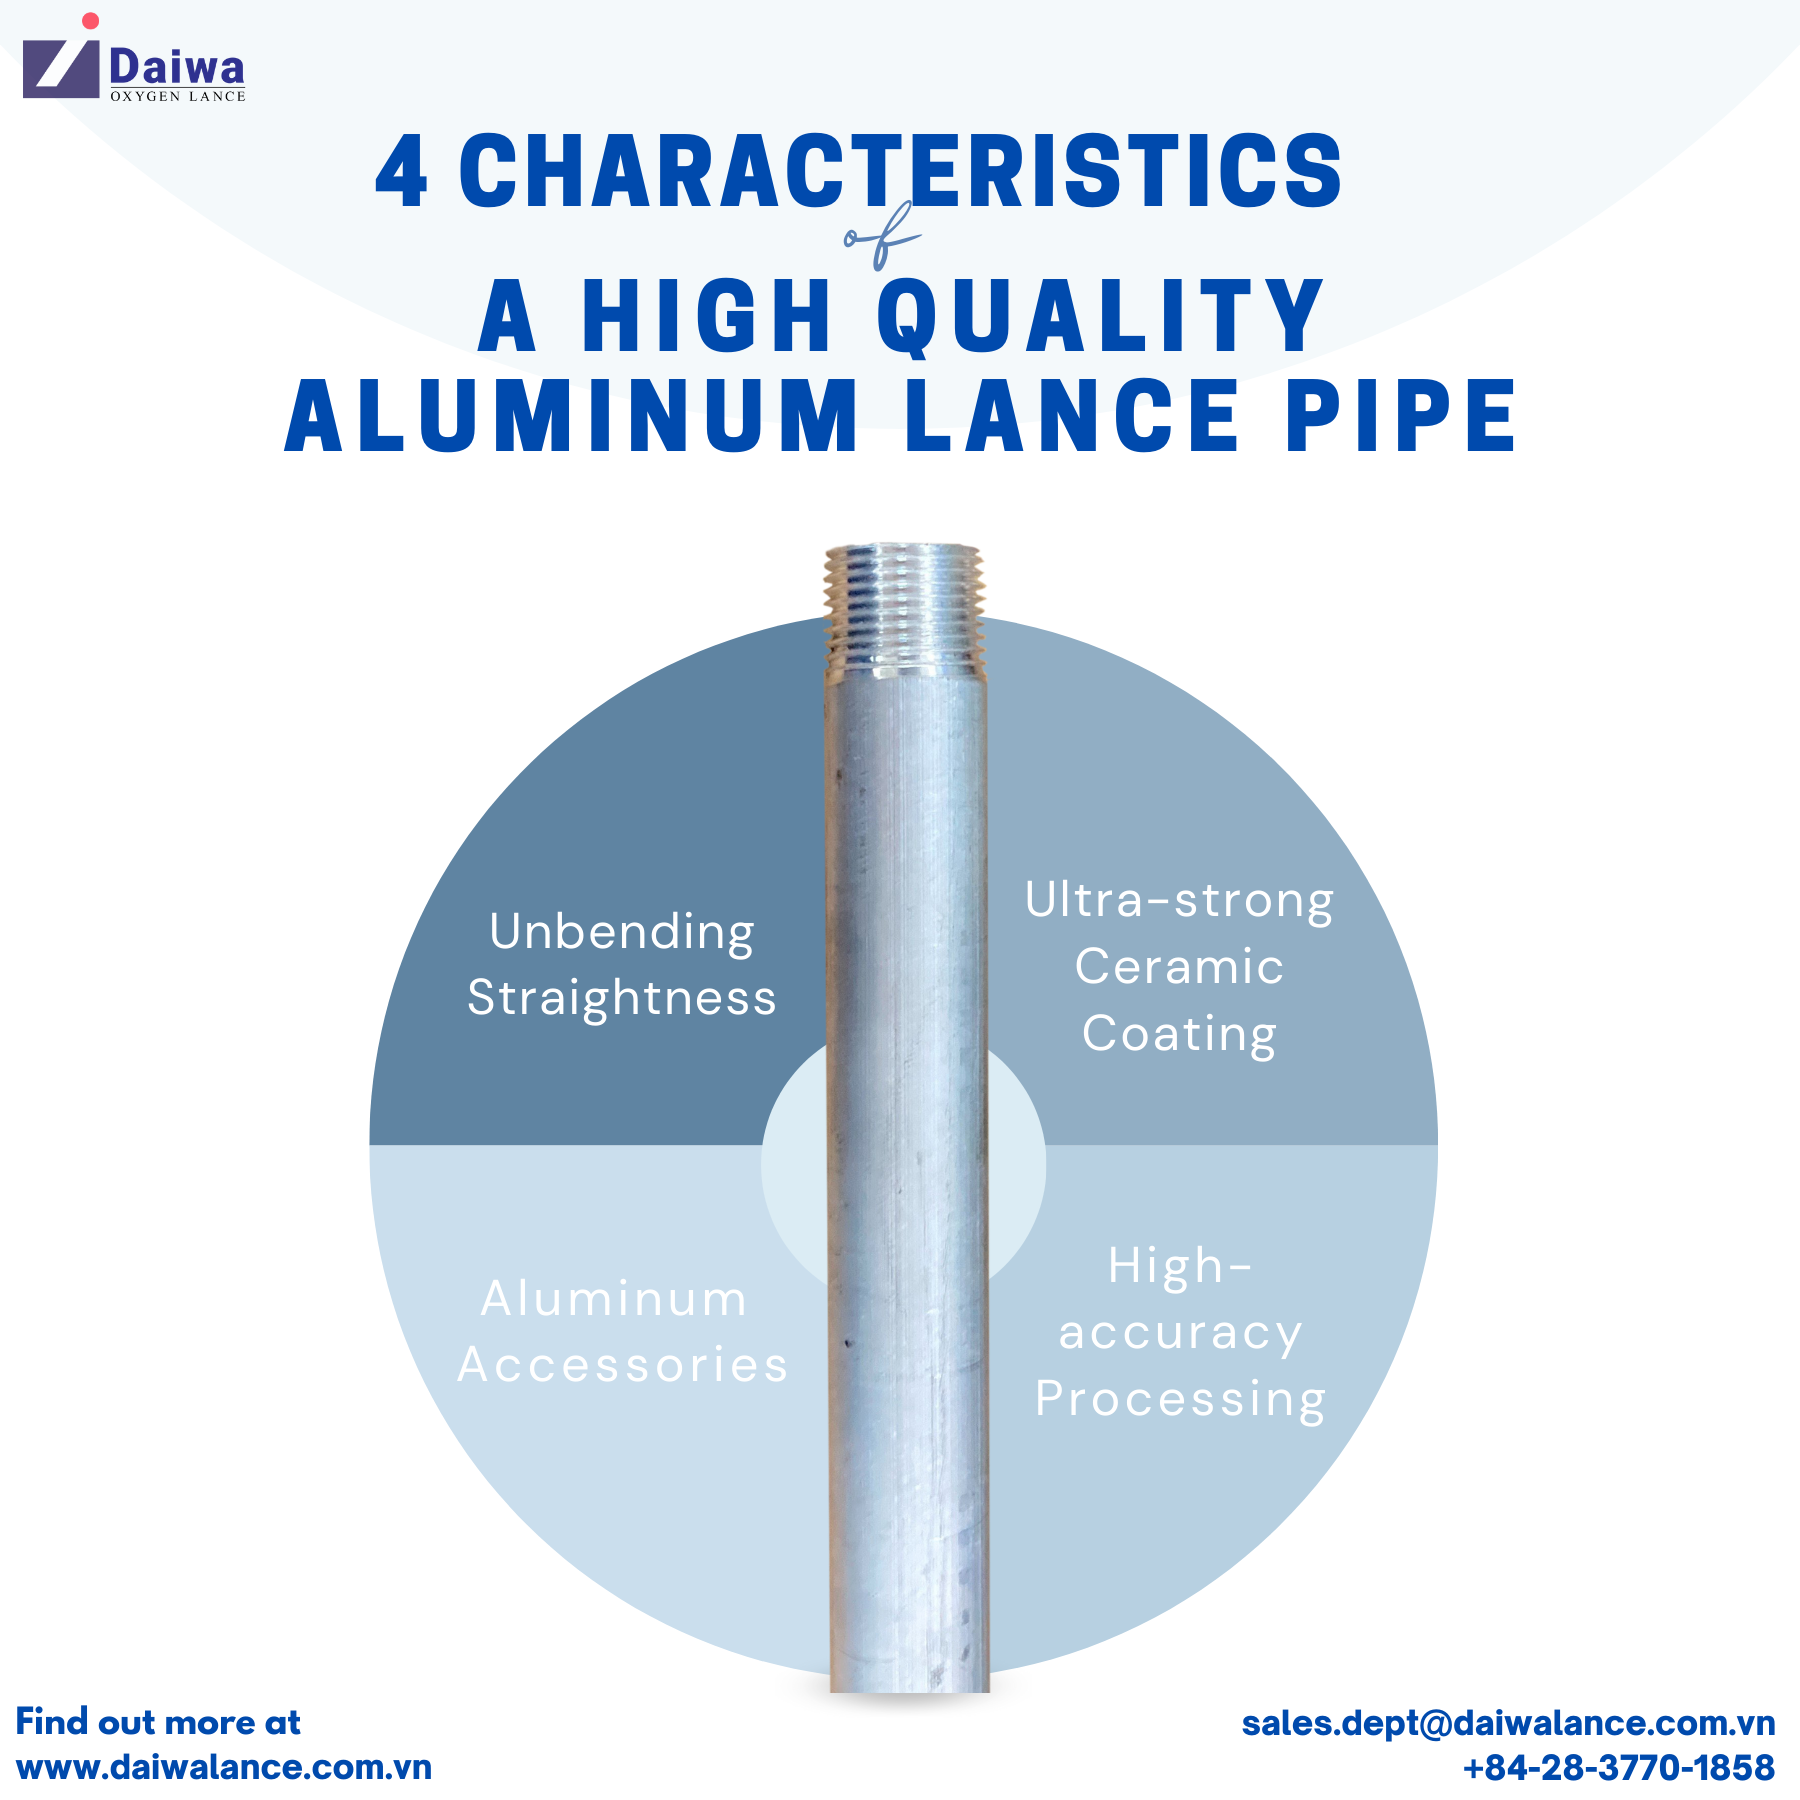 4 Characteristics of A High Quality Aluminum Lance Pipe